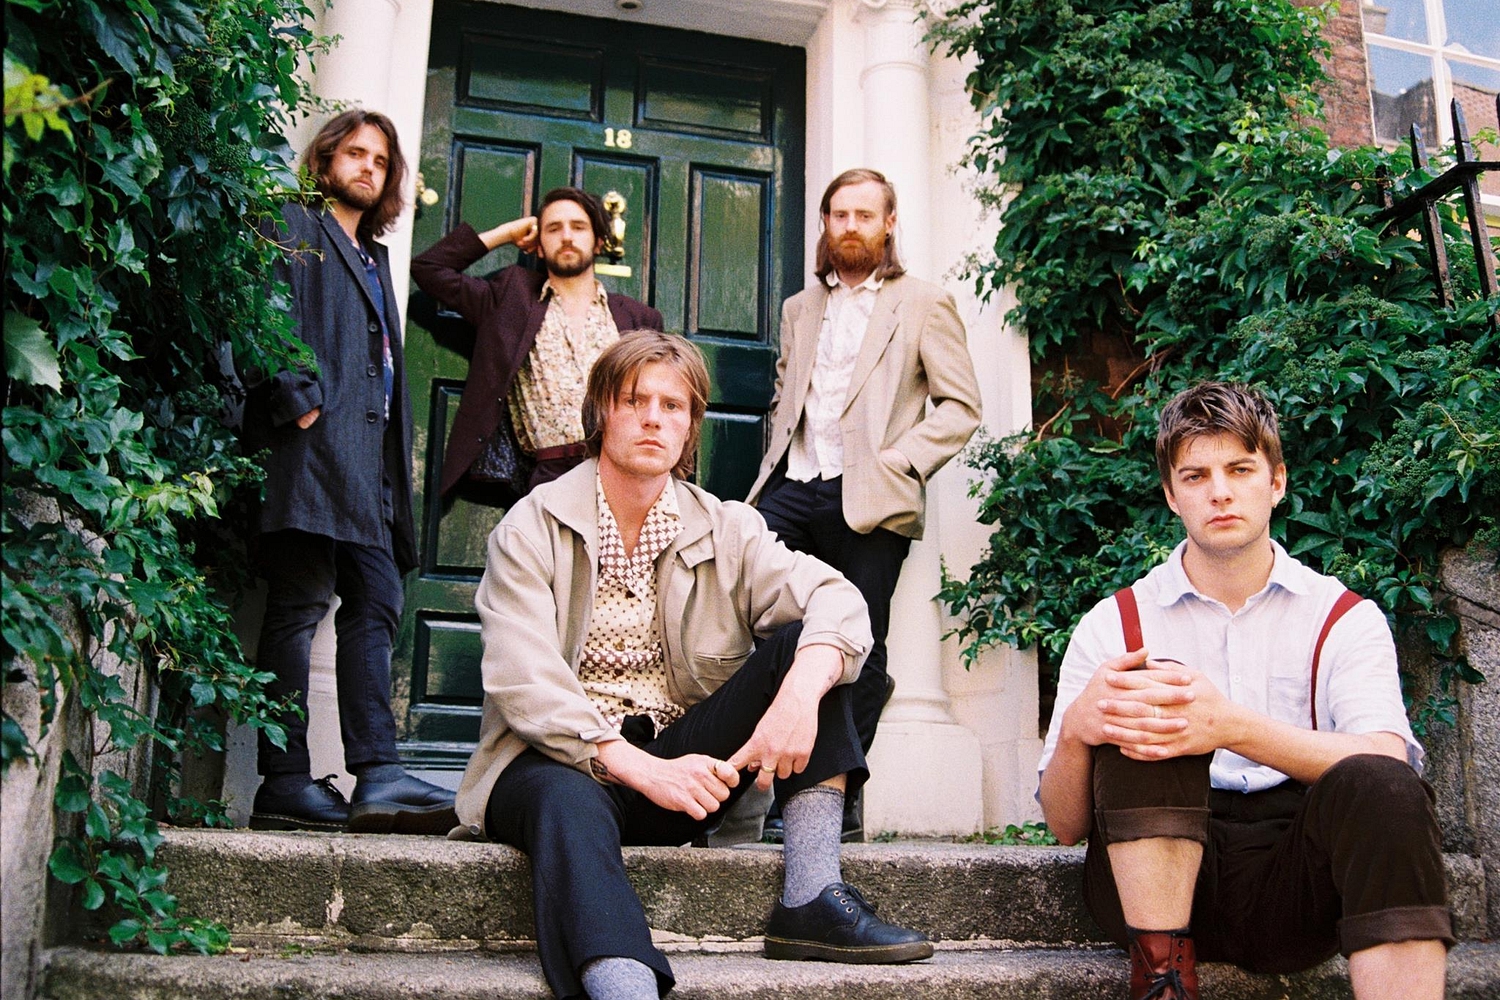 Fontaines DC announce headline show at London’s O2 Academy Brixton